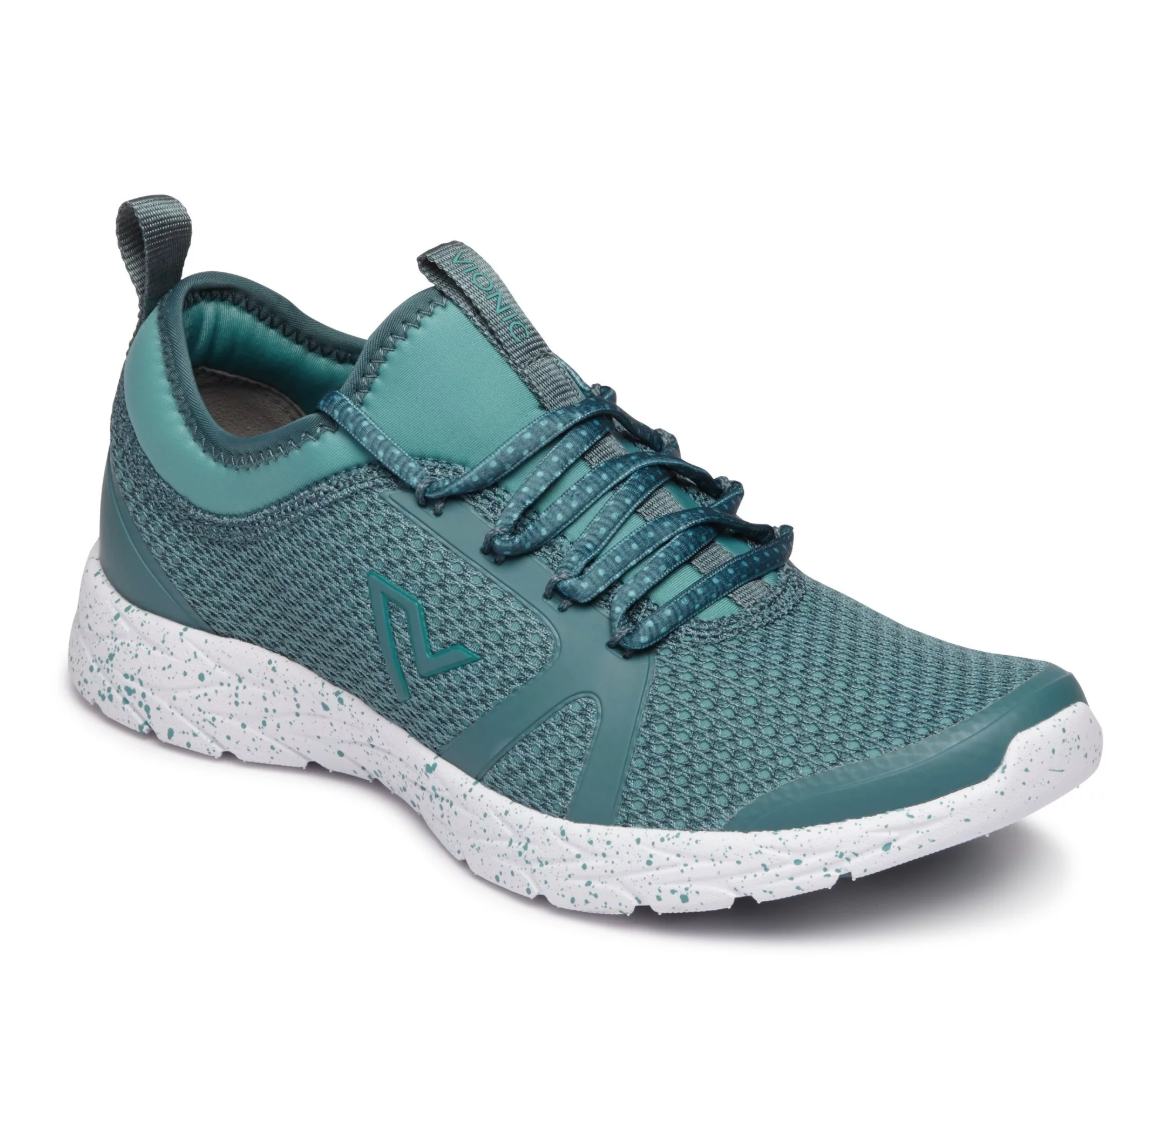 29 Most Comfortable Walking Shoes 